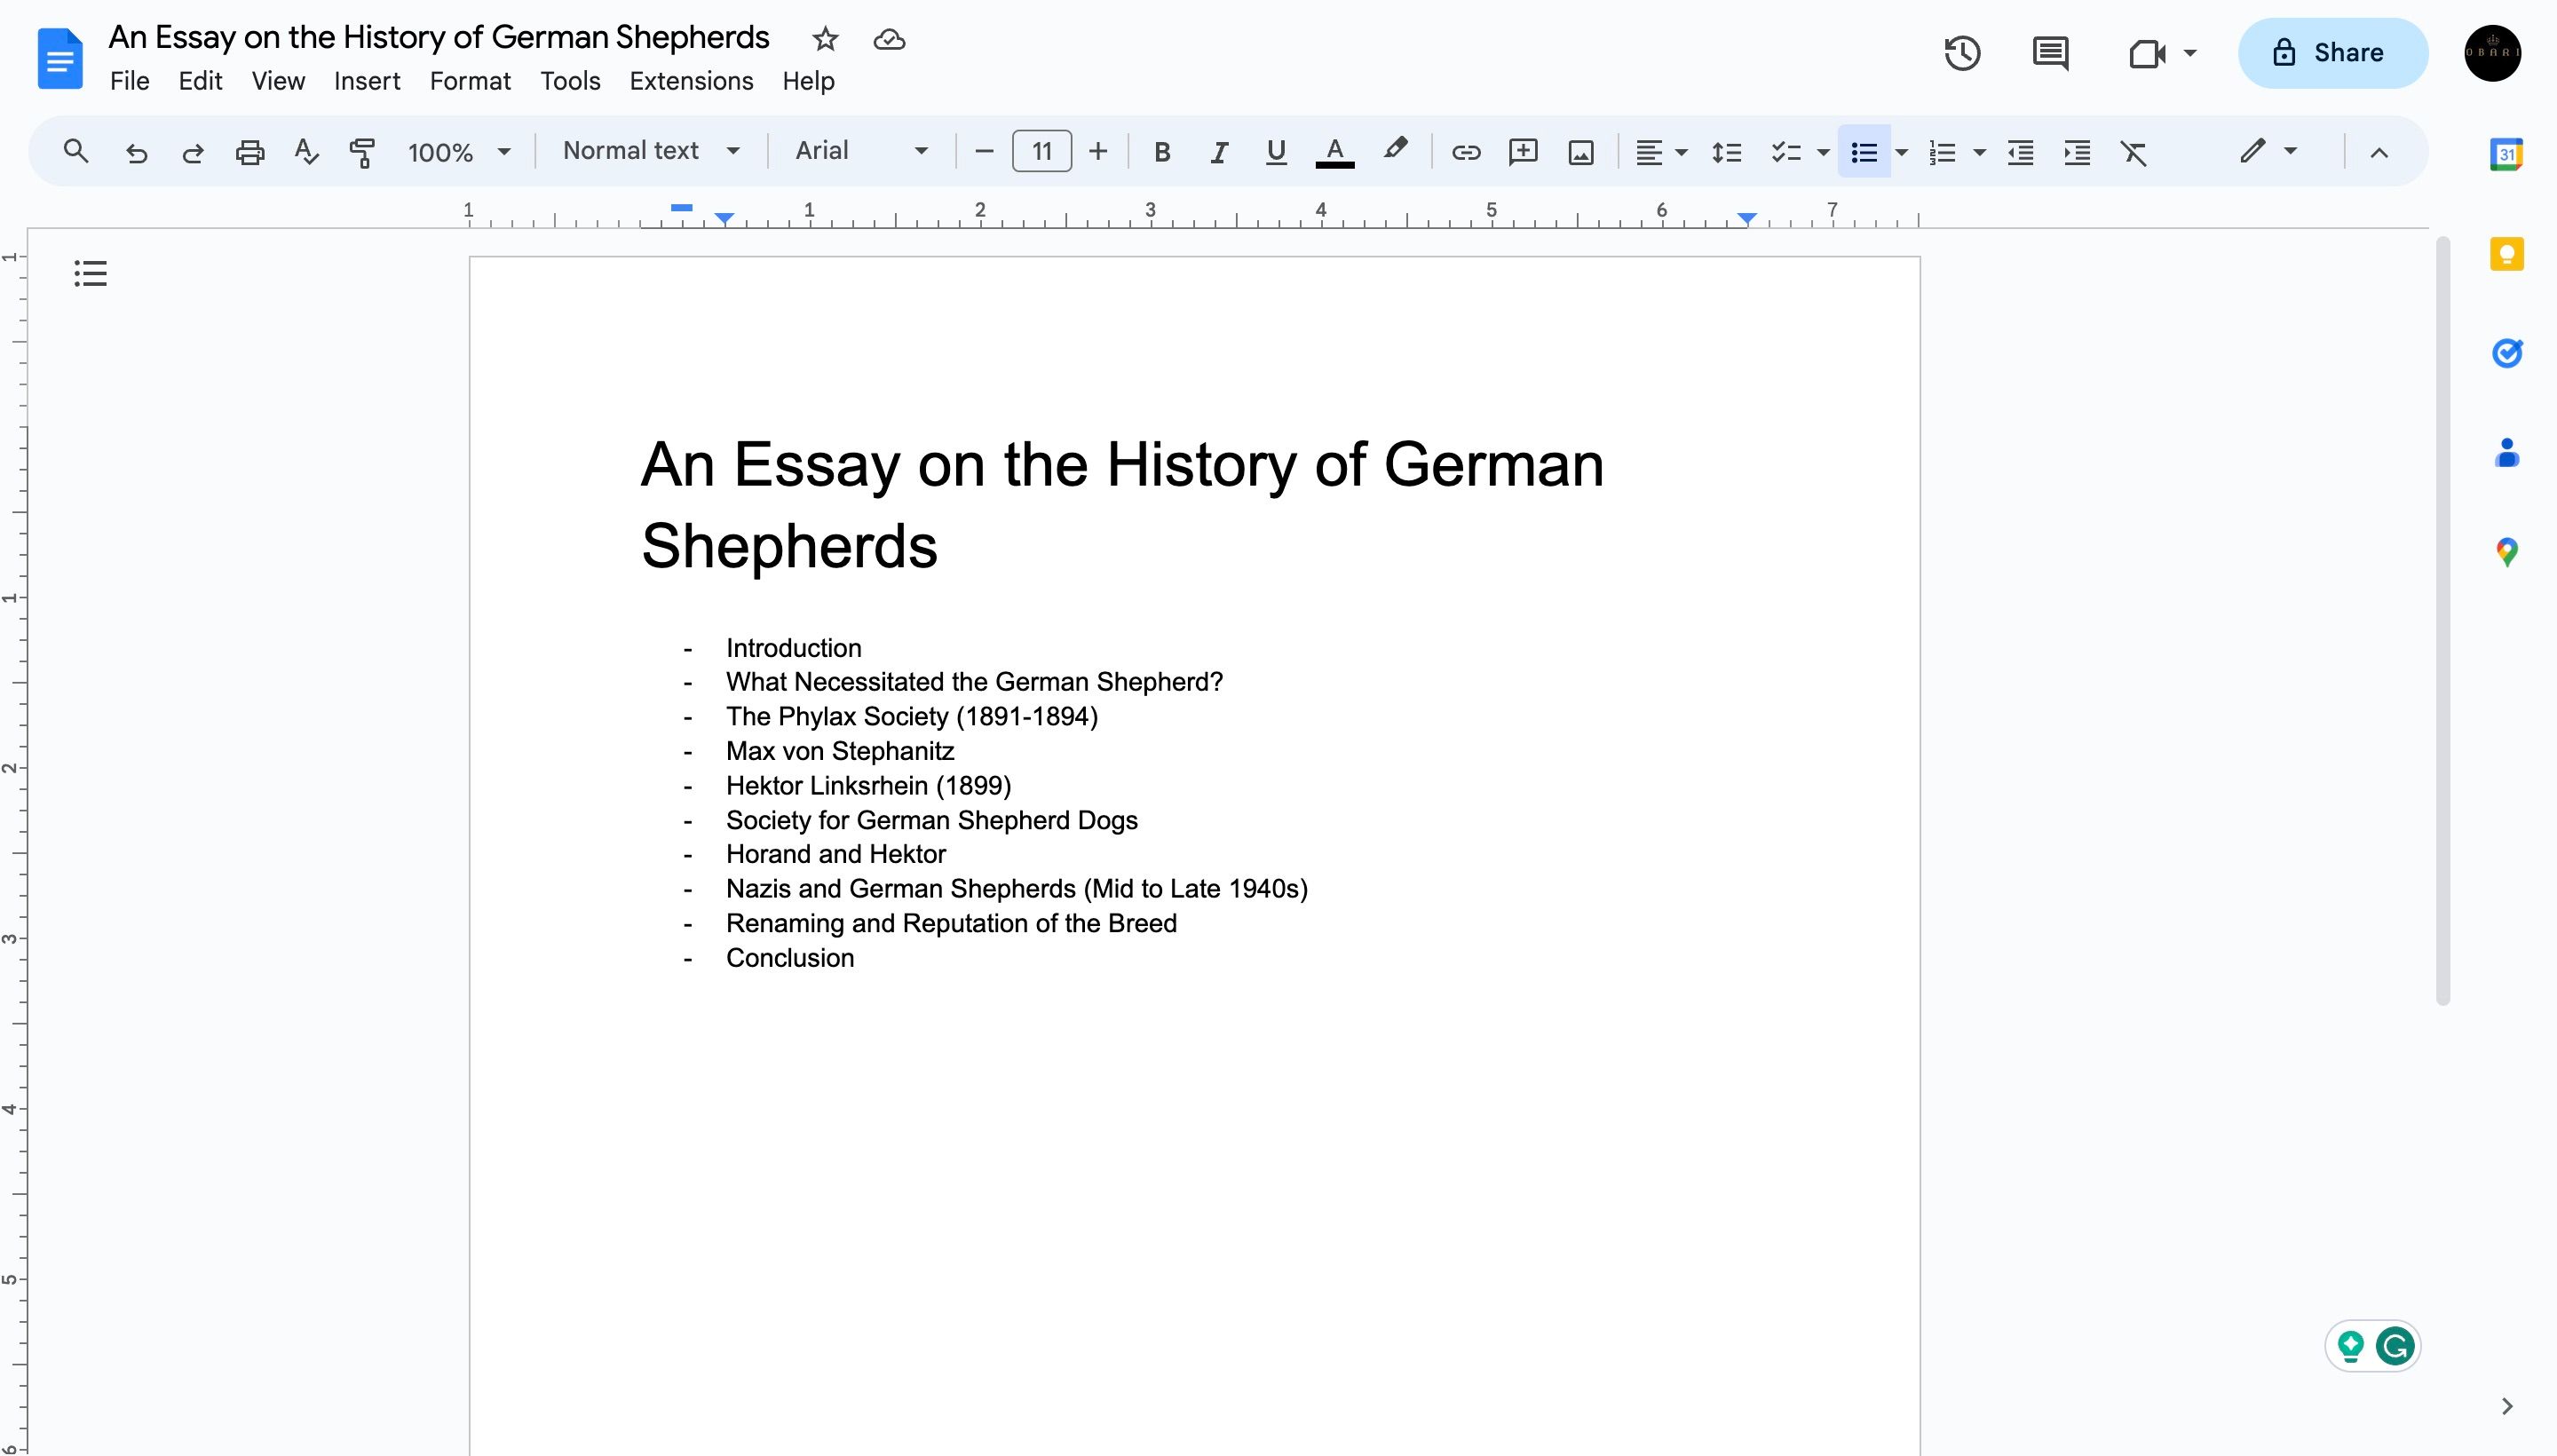 Outline of an essay on the history of German Shepherds